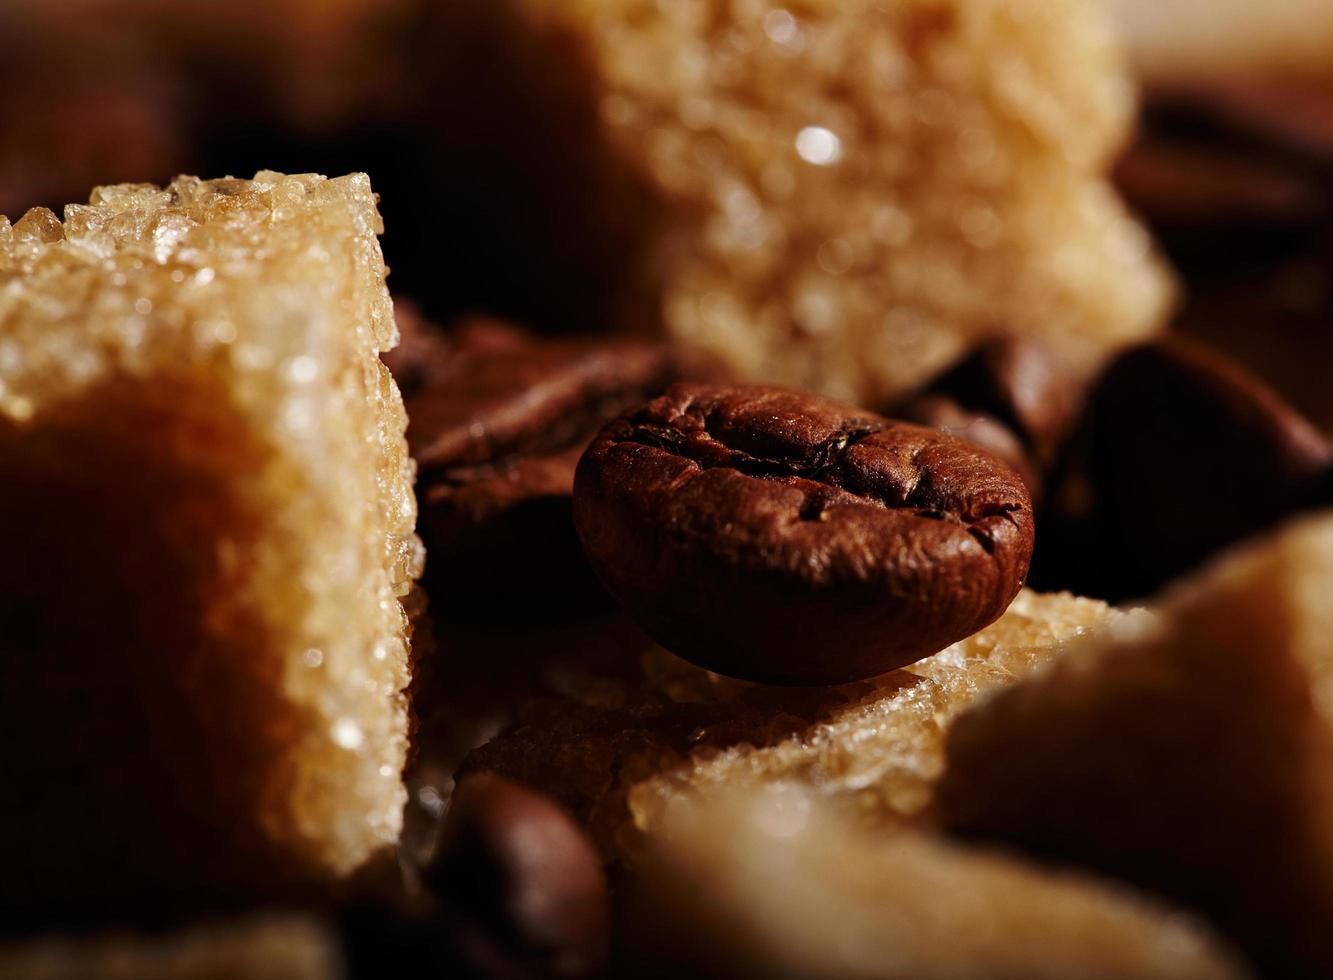 Sugar cubes and coffee photo